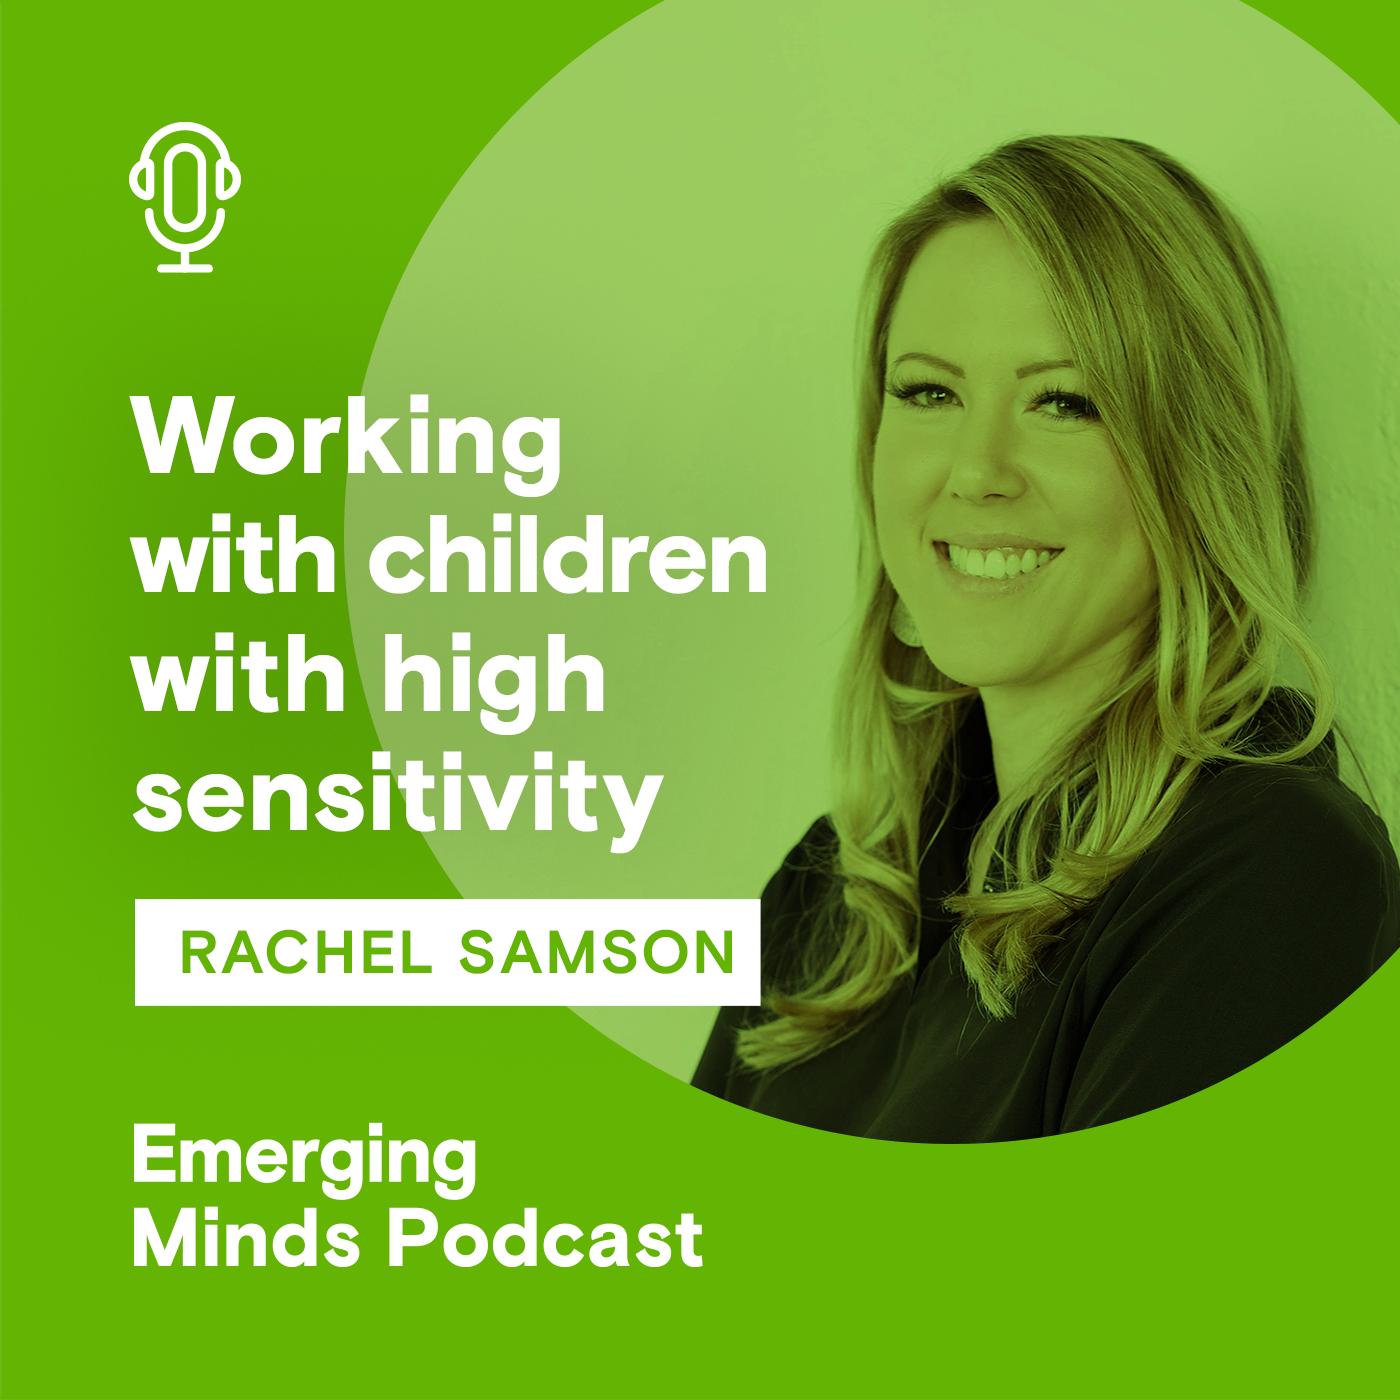 Working with children with high sensitivity